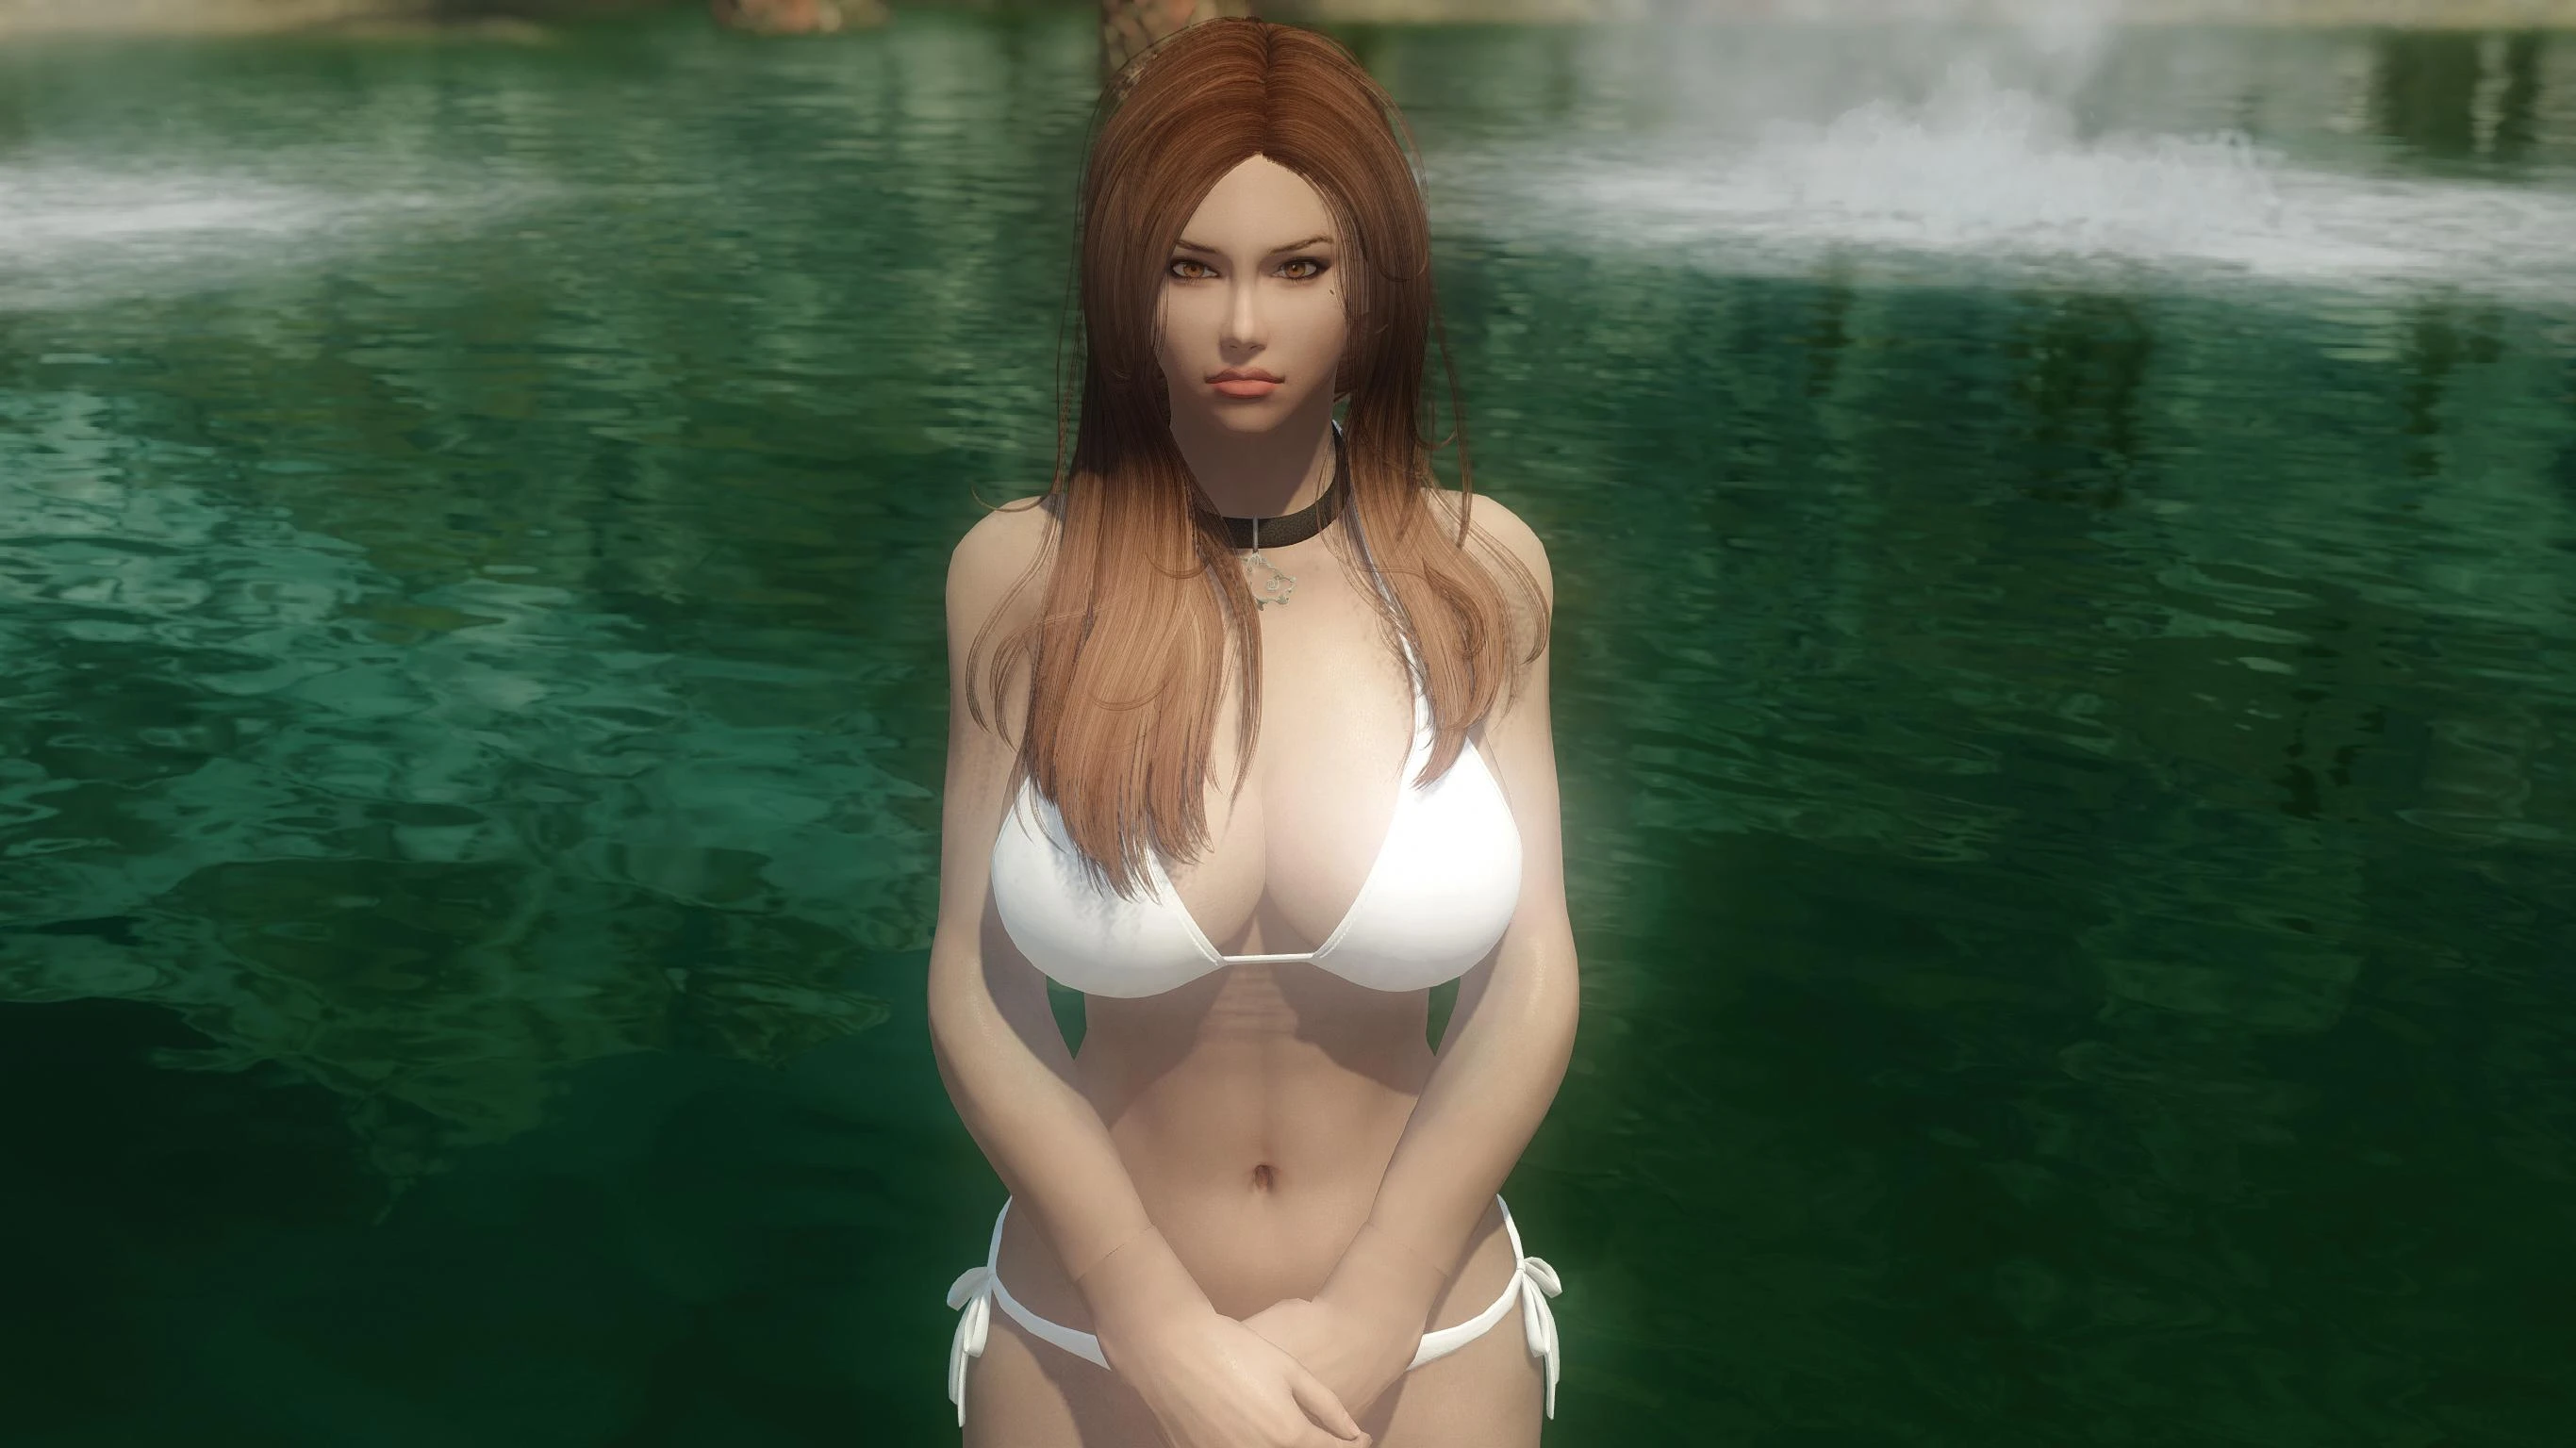 chad bauer recommends skyrim bathing suit mod pic